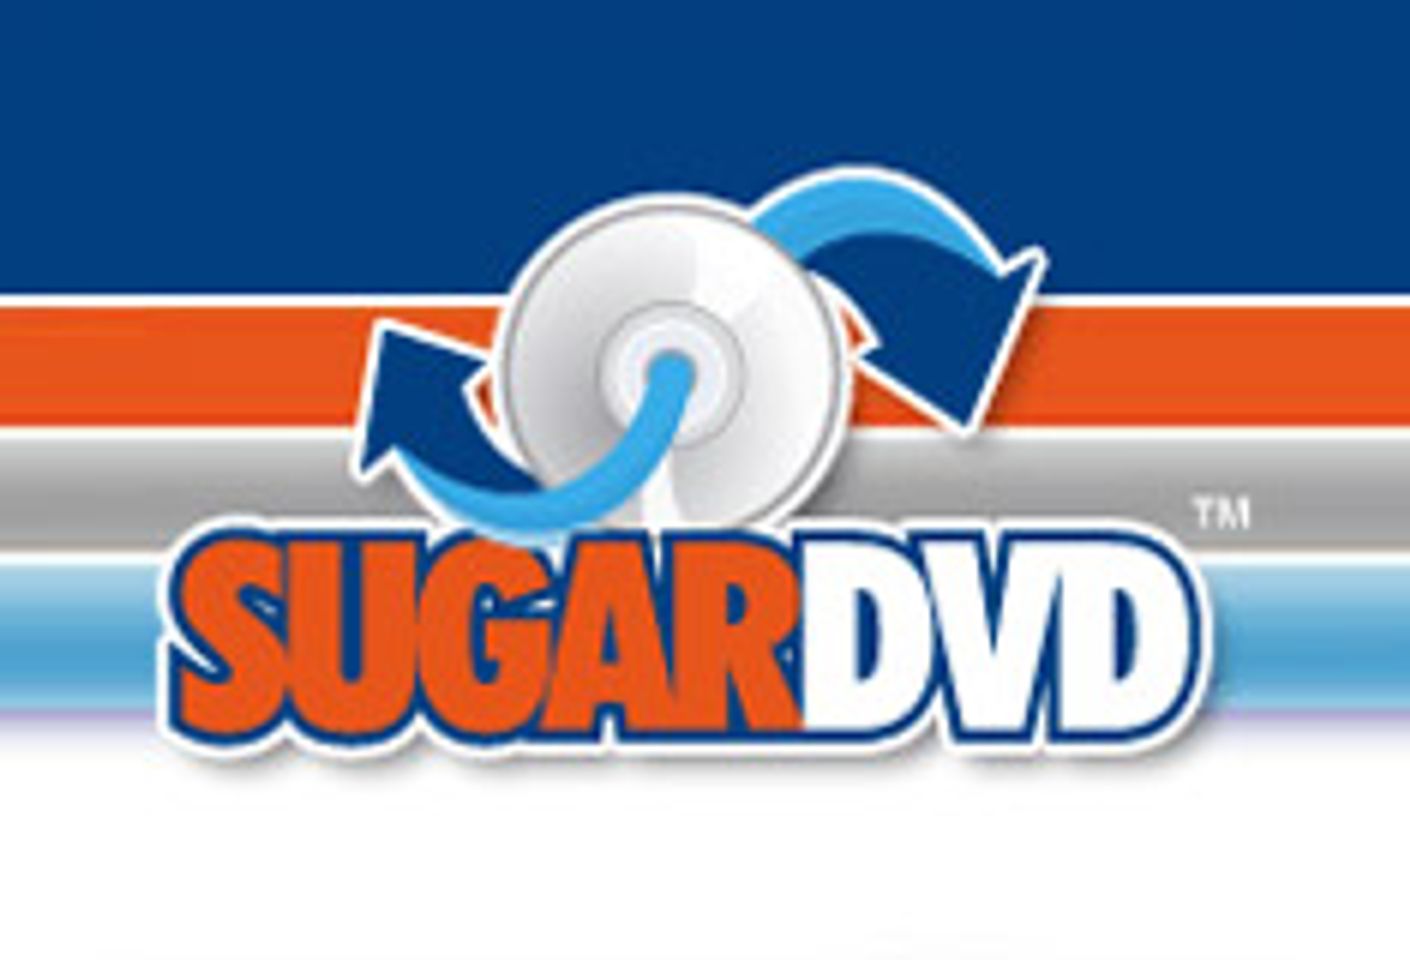 SugarDVD Announces Greed Giveaway